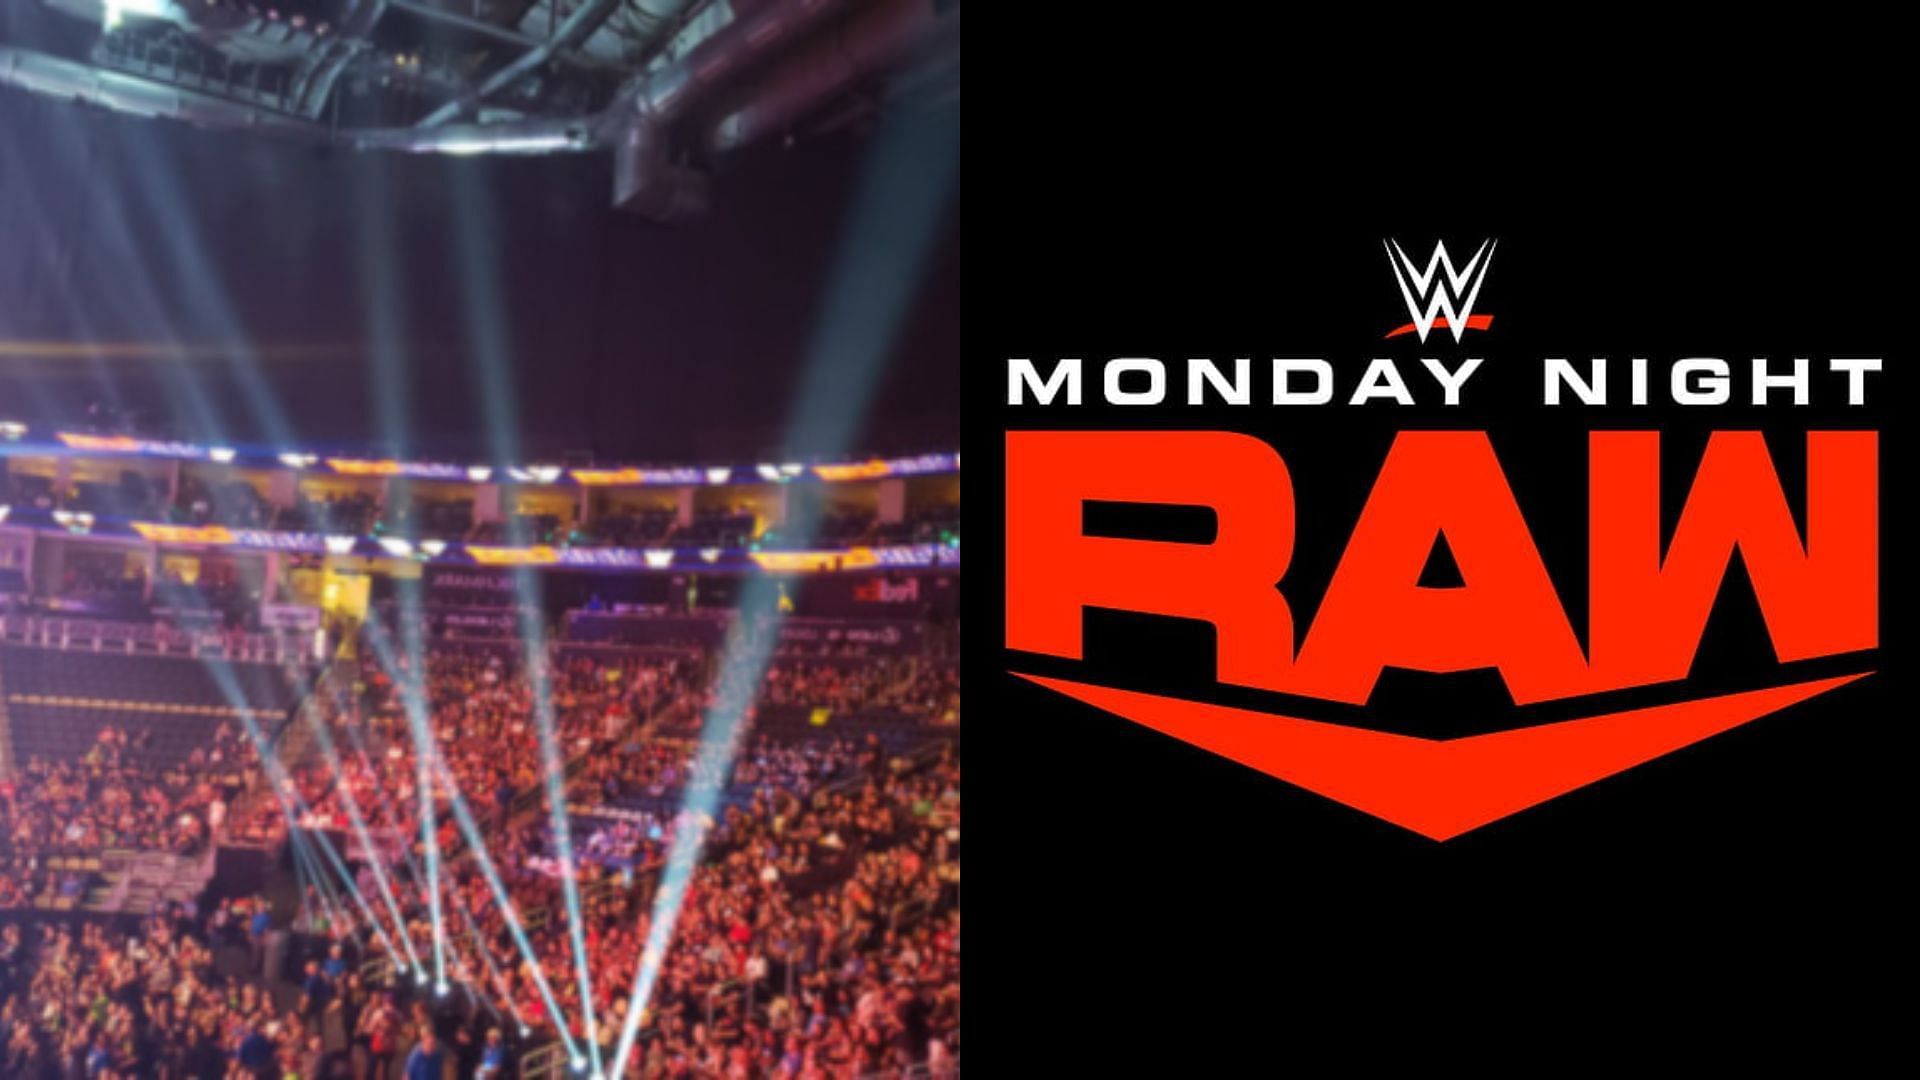 WWE RAW this week had some interesting twists and turns!